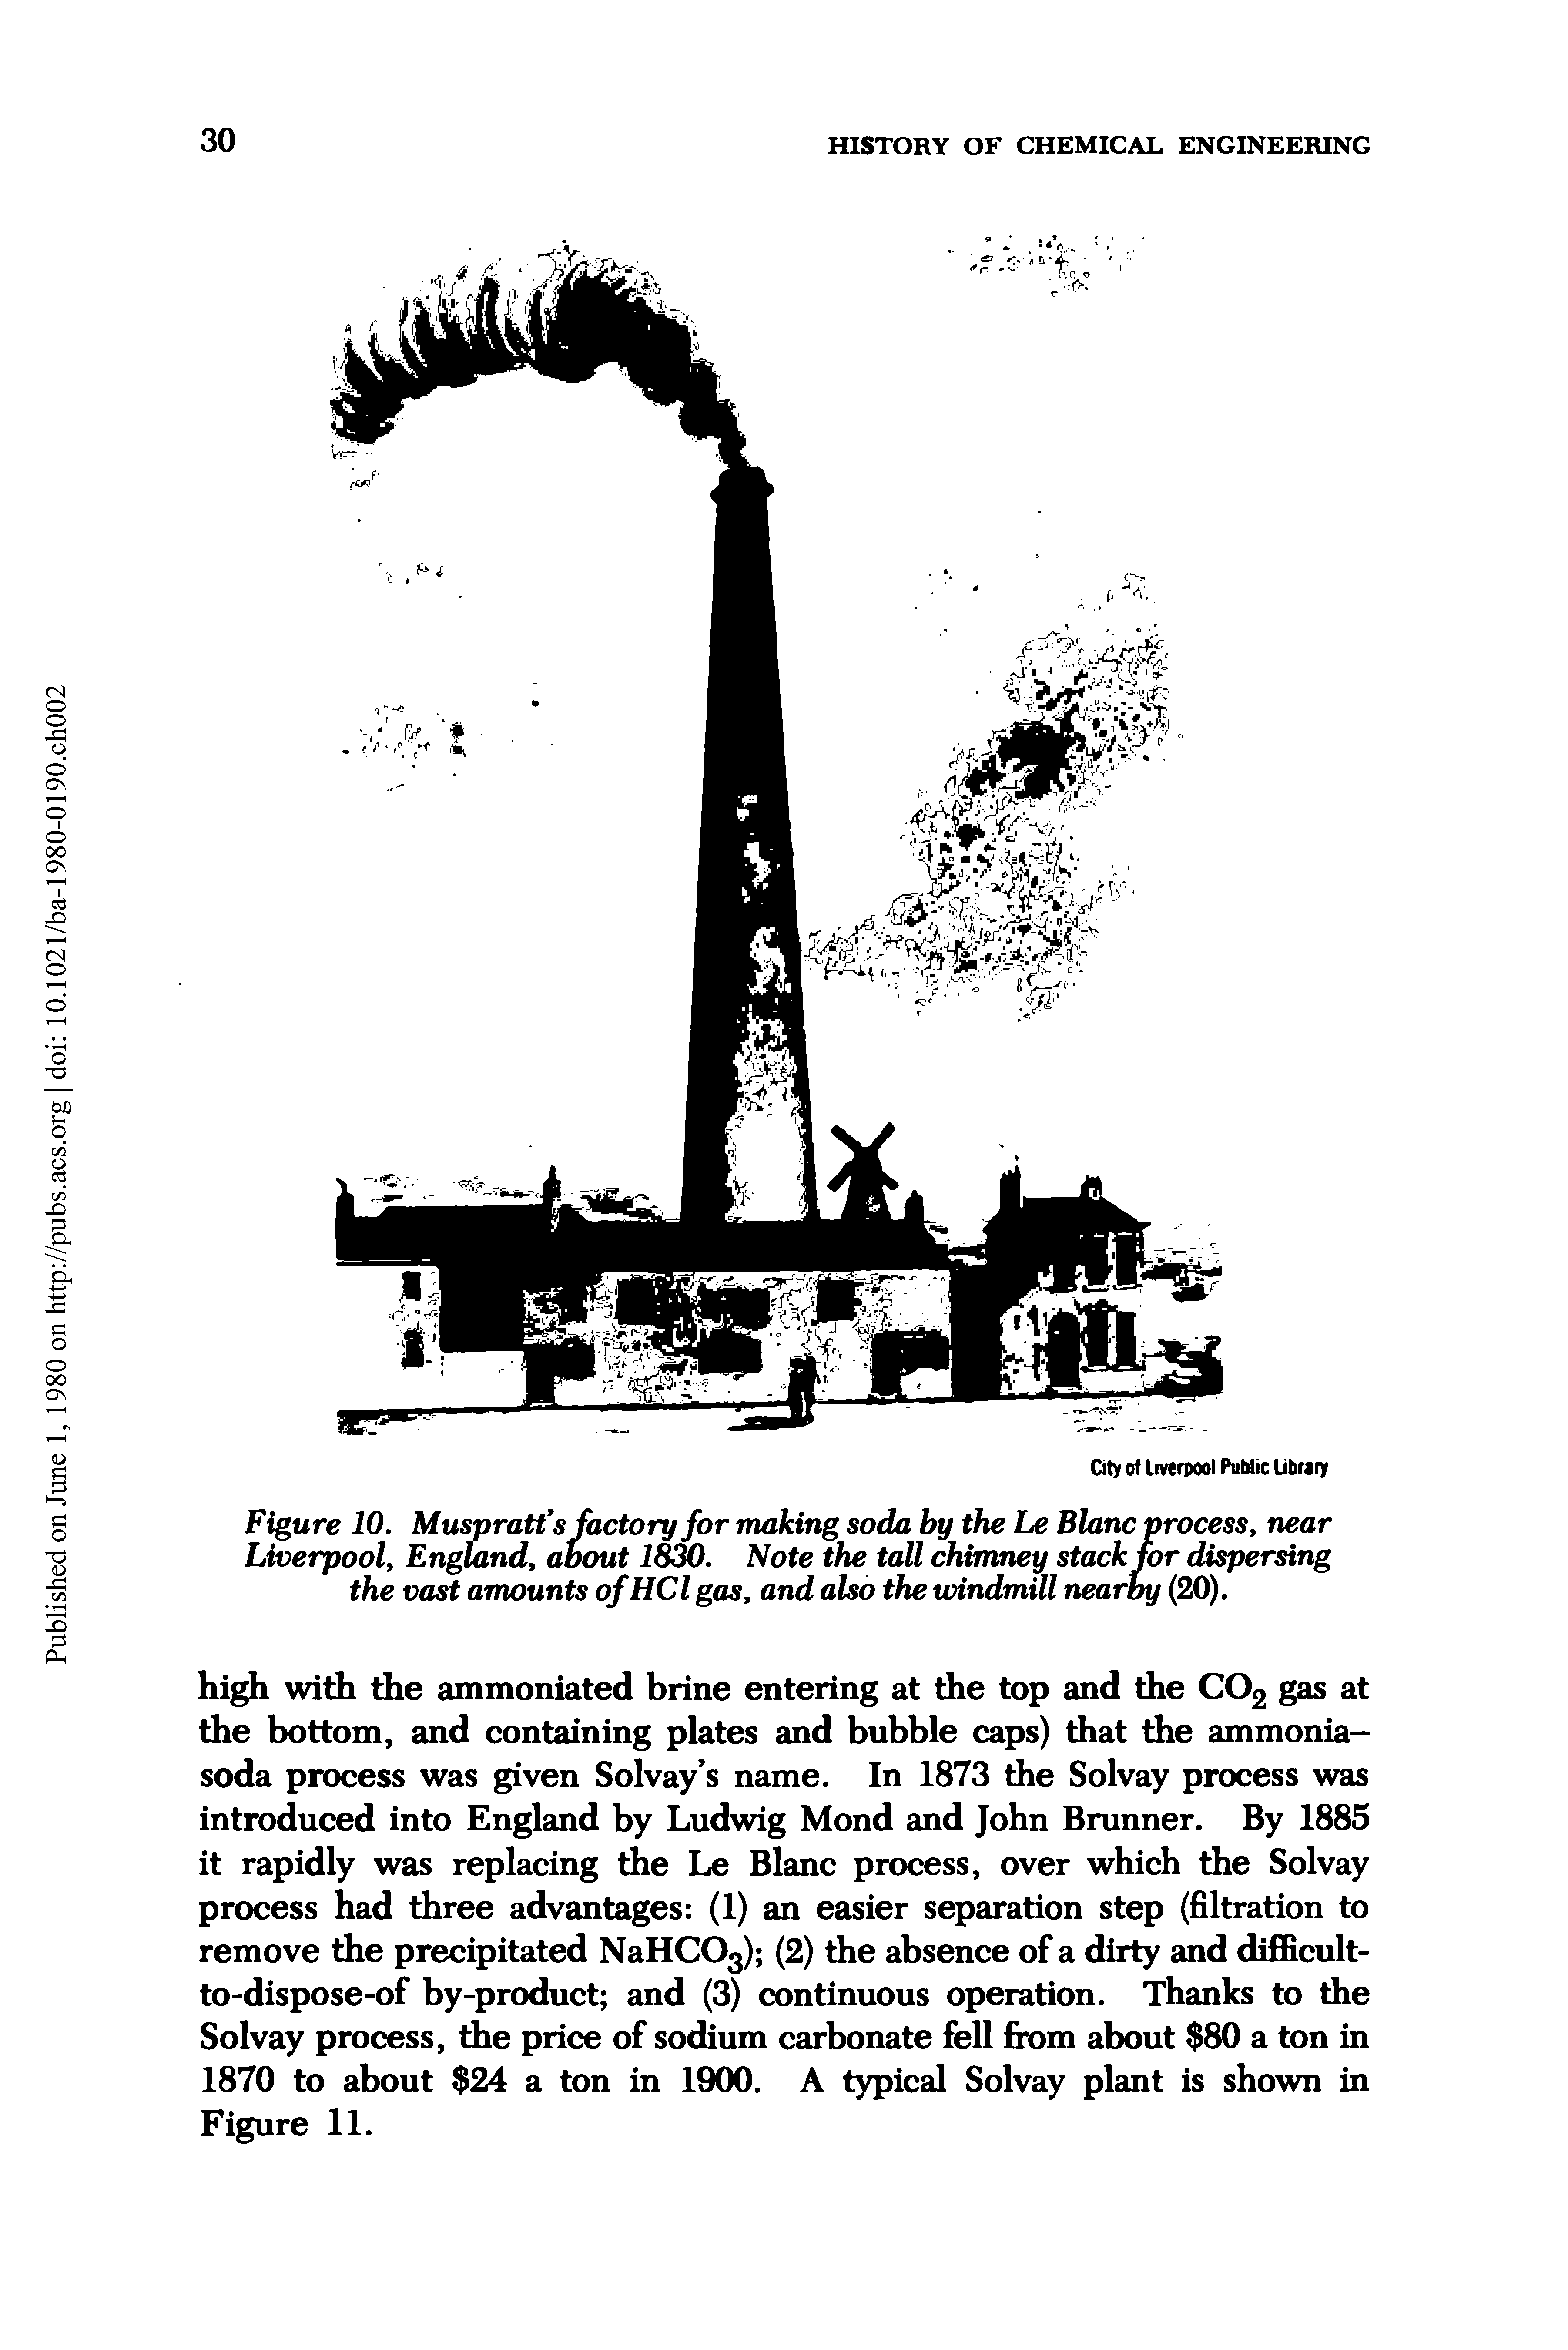 Figure 10. Muspratf s factory for making soda by the Le Blanc process, near Liverpool, England, about 1830. Note the tall chimney stack for dispersing the vast amounts ofHCl gas, and also the windmill nearby (20).